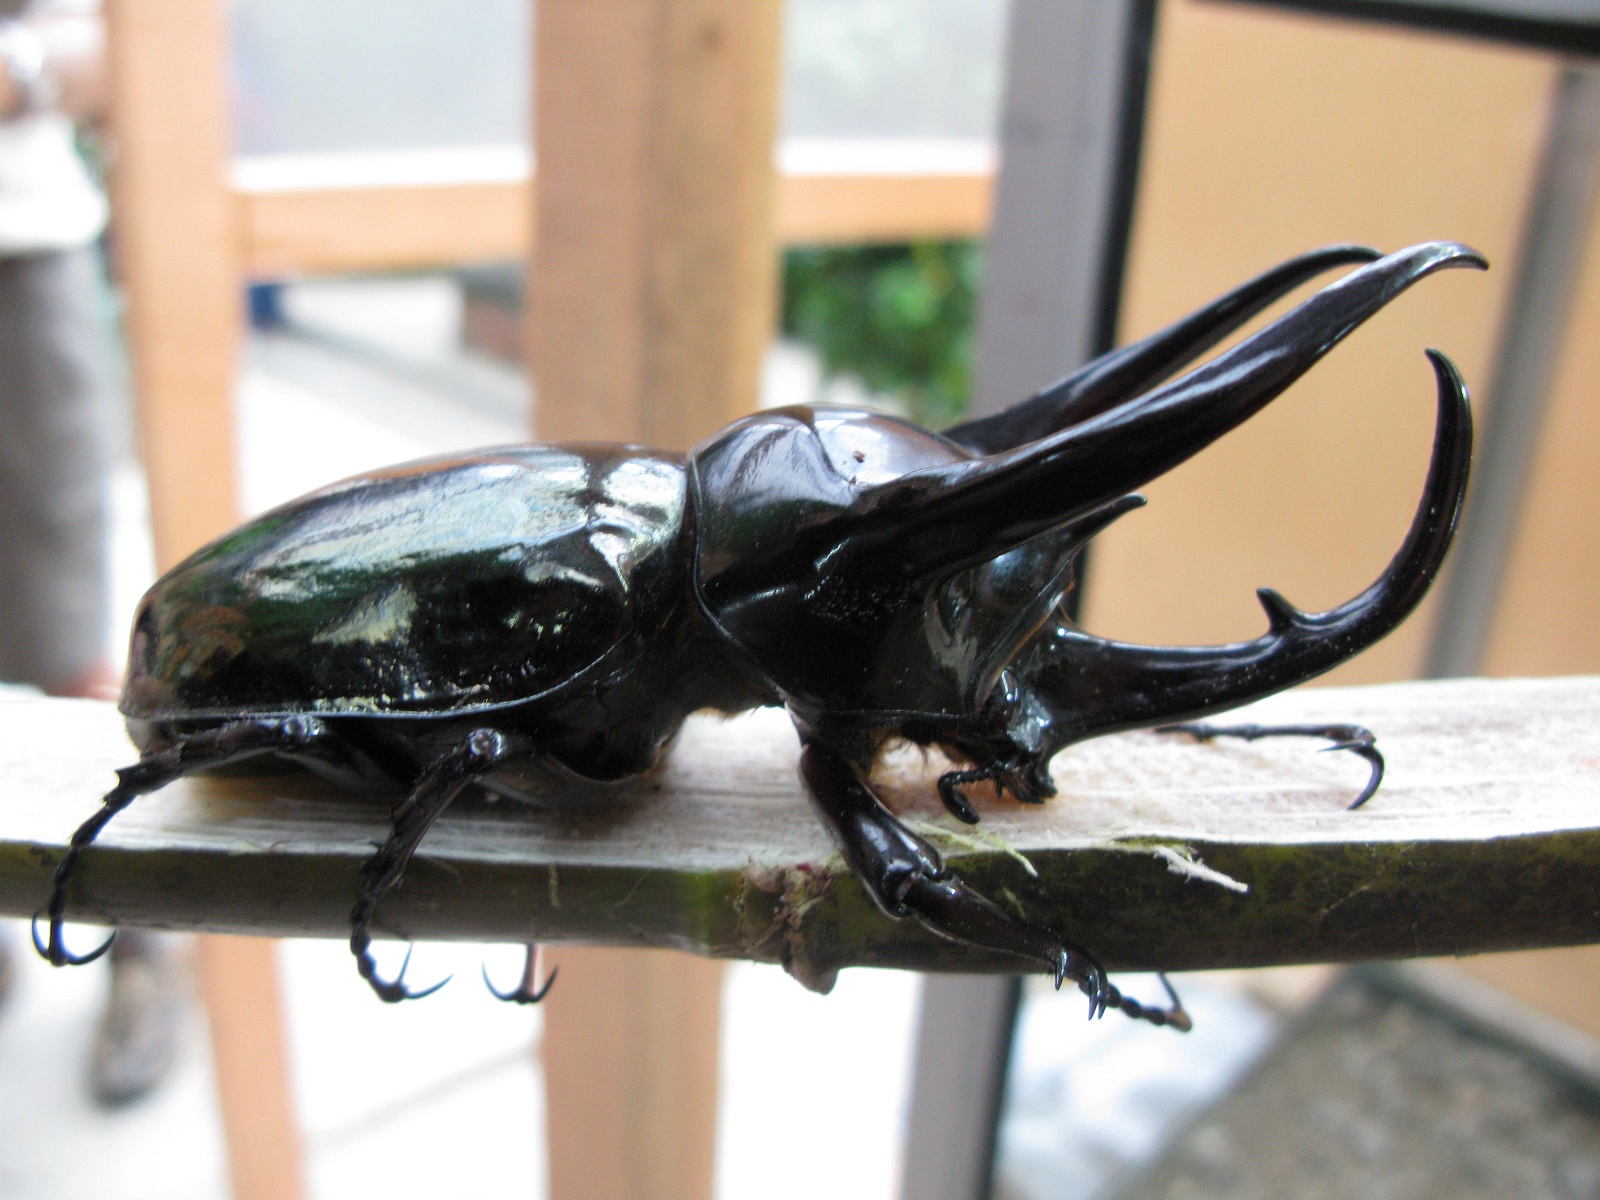 A larger cousin I met in Malaysia - the Malaysian Rhinoceros Beetle